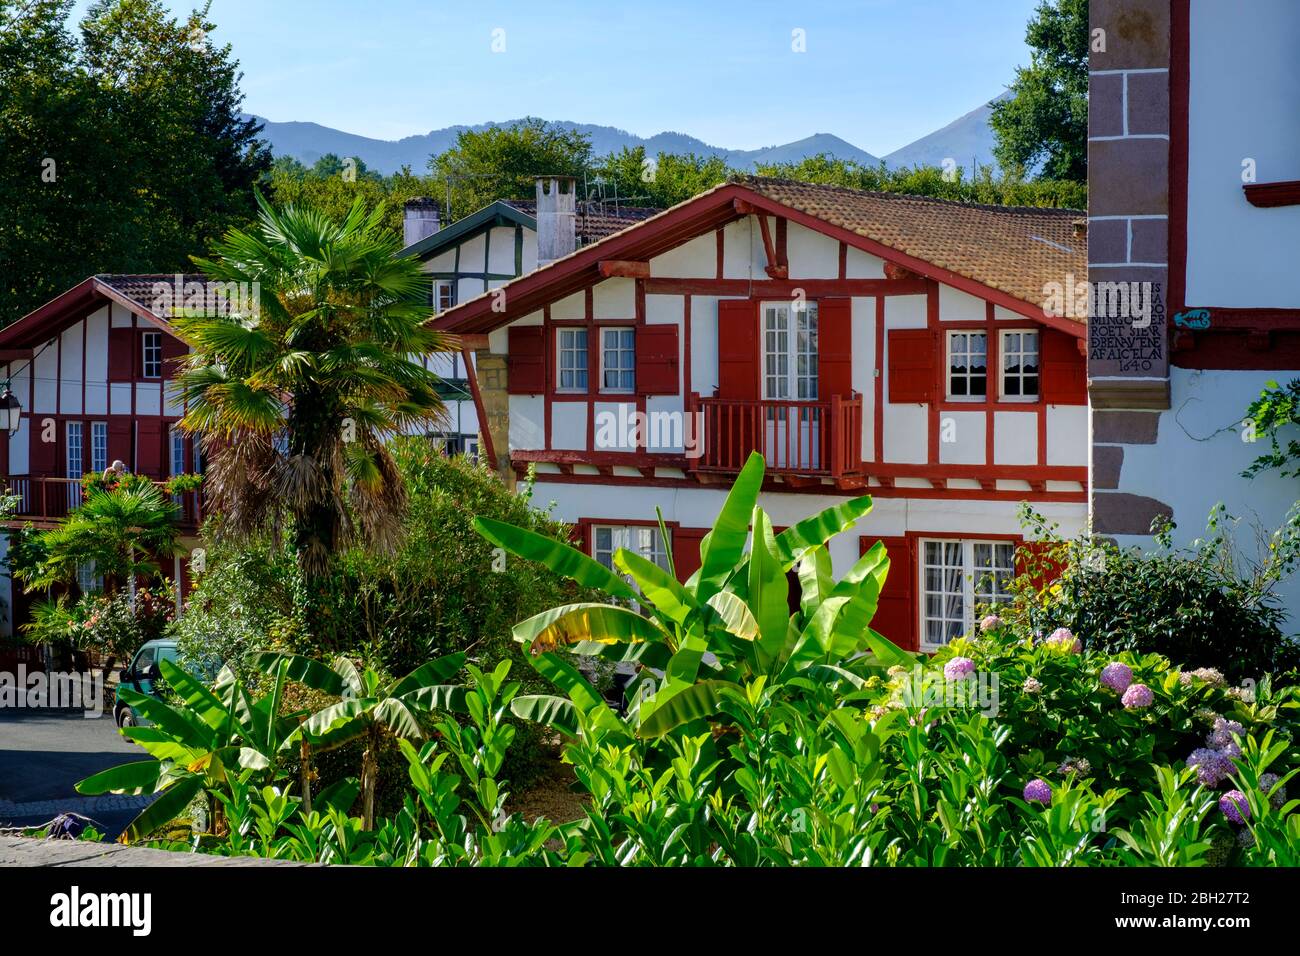 France, Pyrenees-Atlantiques, Ainhoa, Flowering garden plants in front of half-timbered house Stock Photo